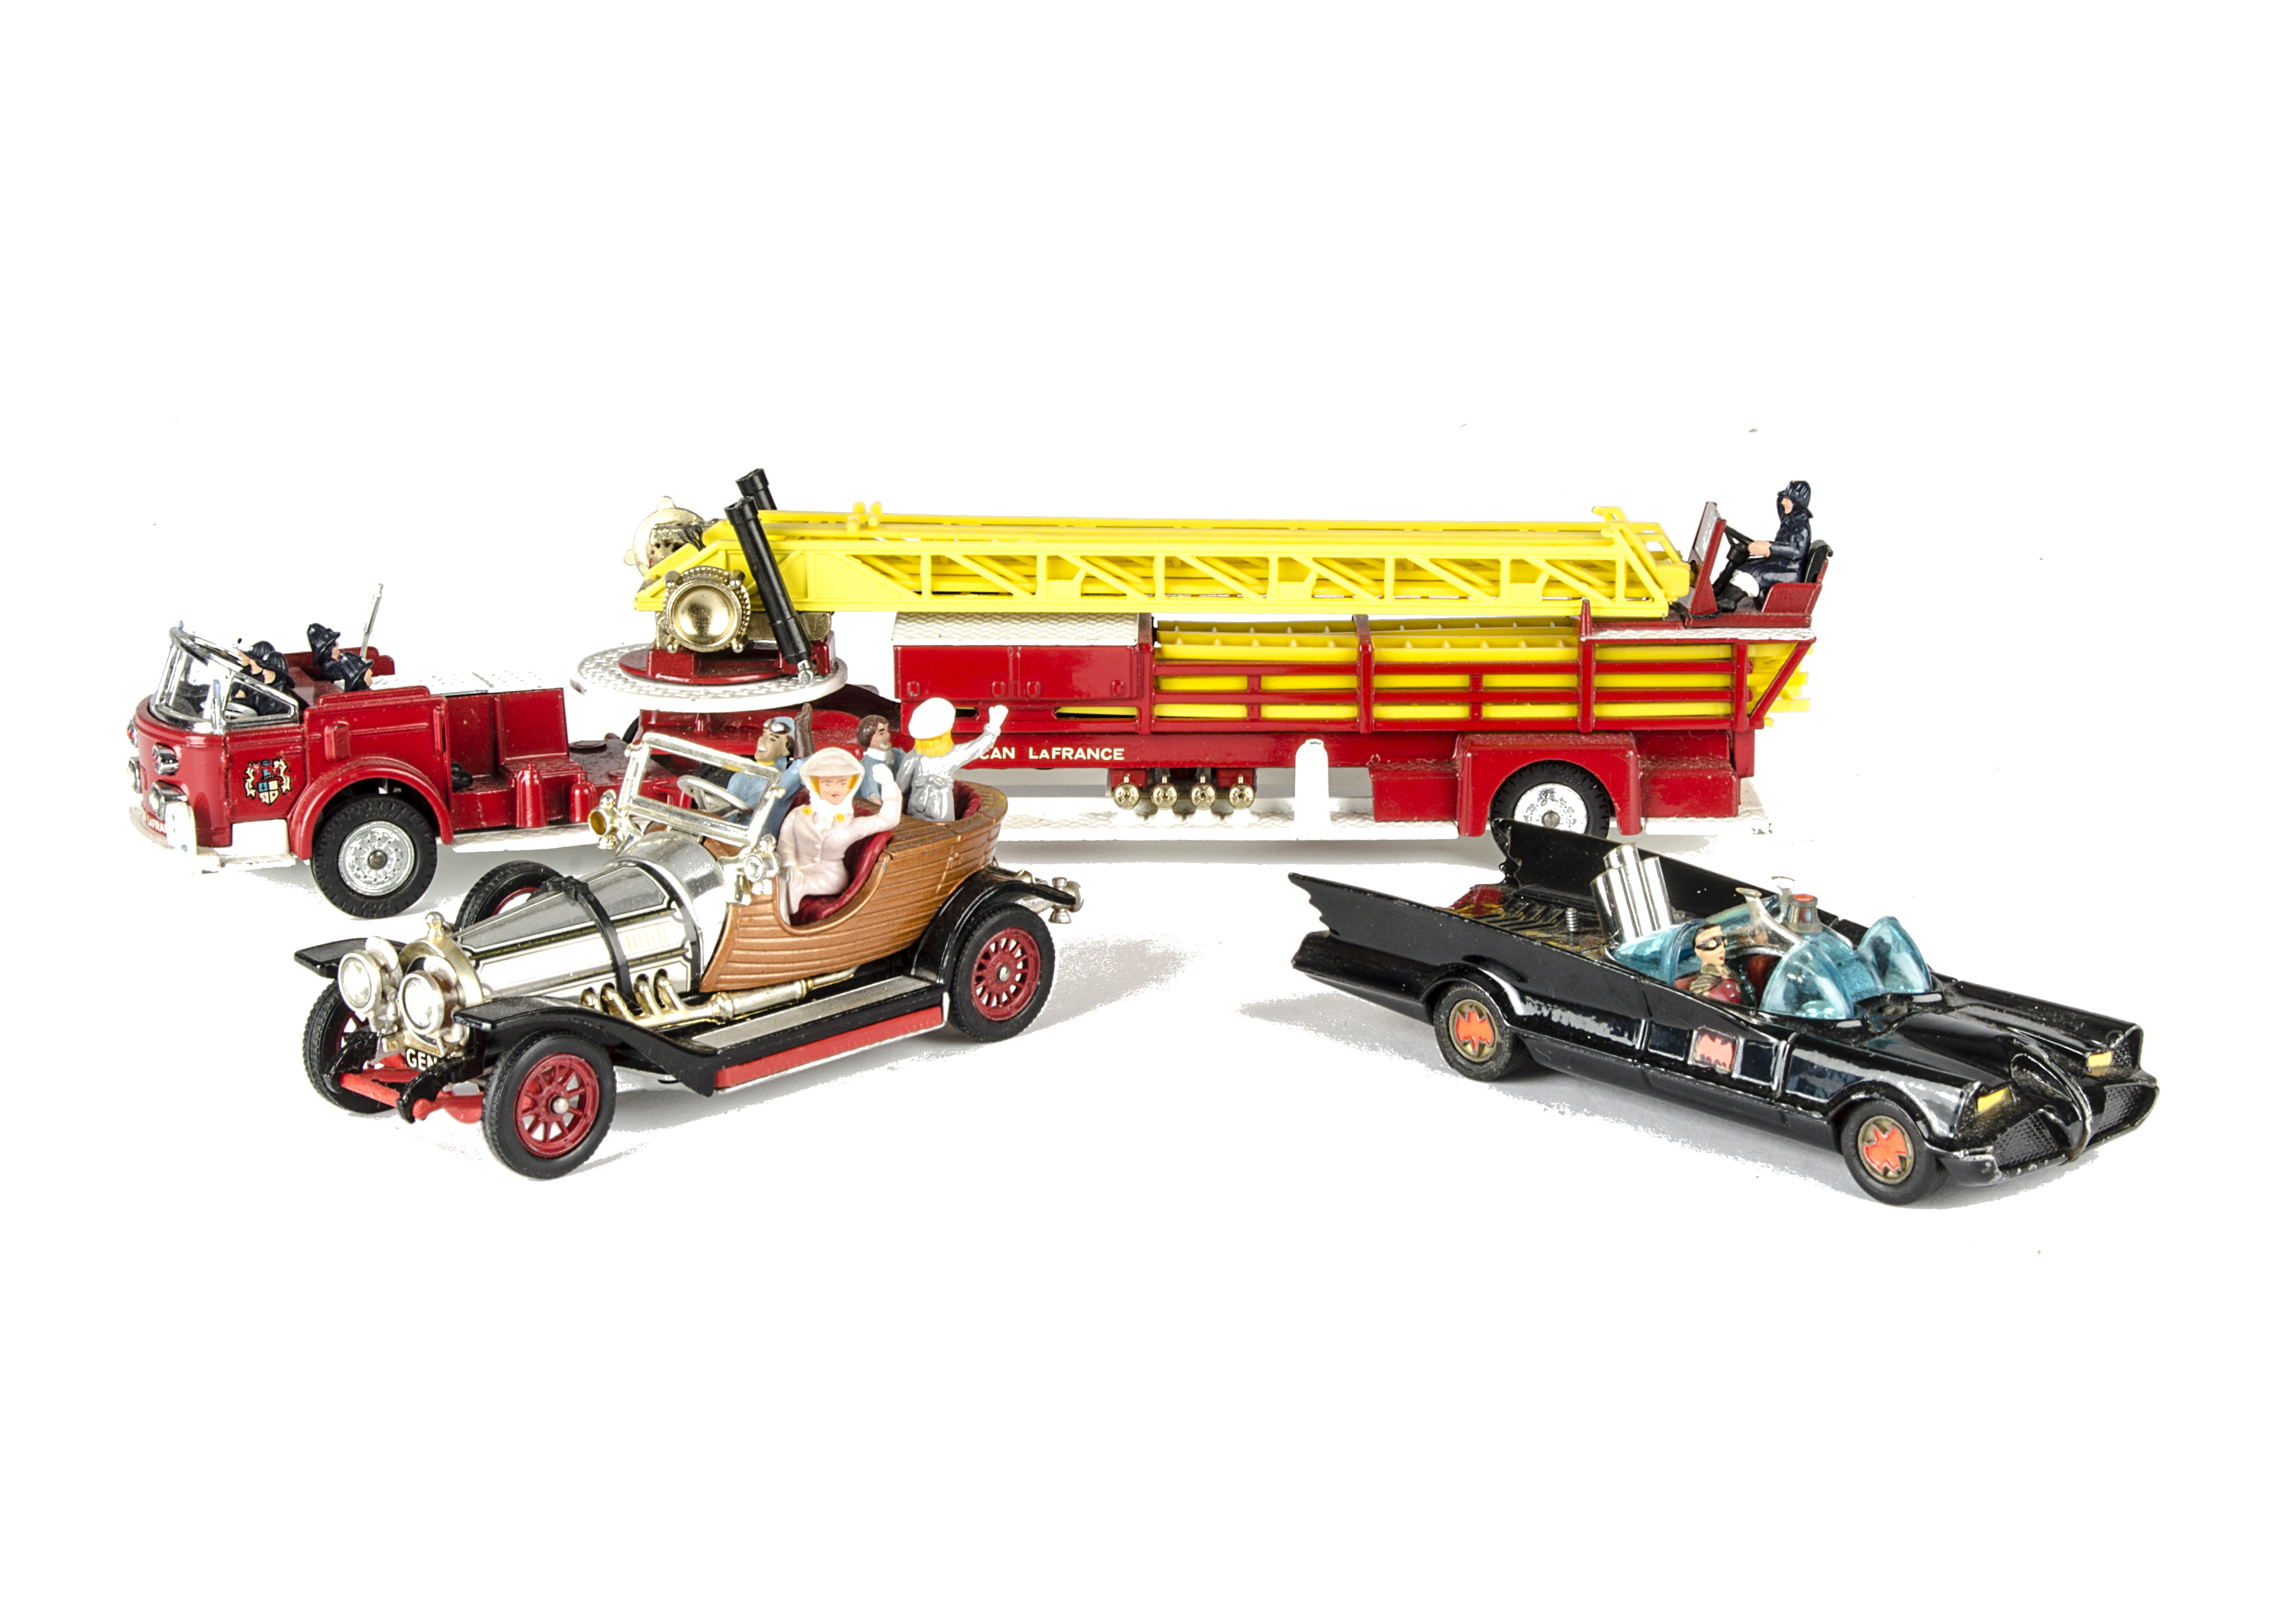 Corgi unboxed Chitty, Batmobile and American La France Fire Engine, chitty Chitty Bang Bang with